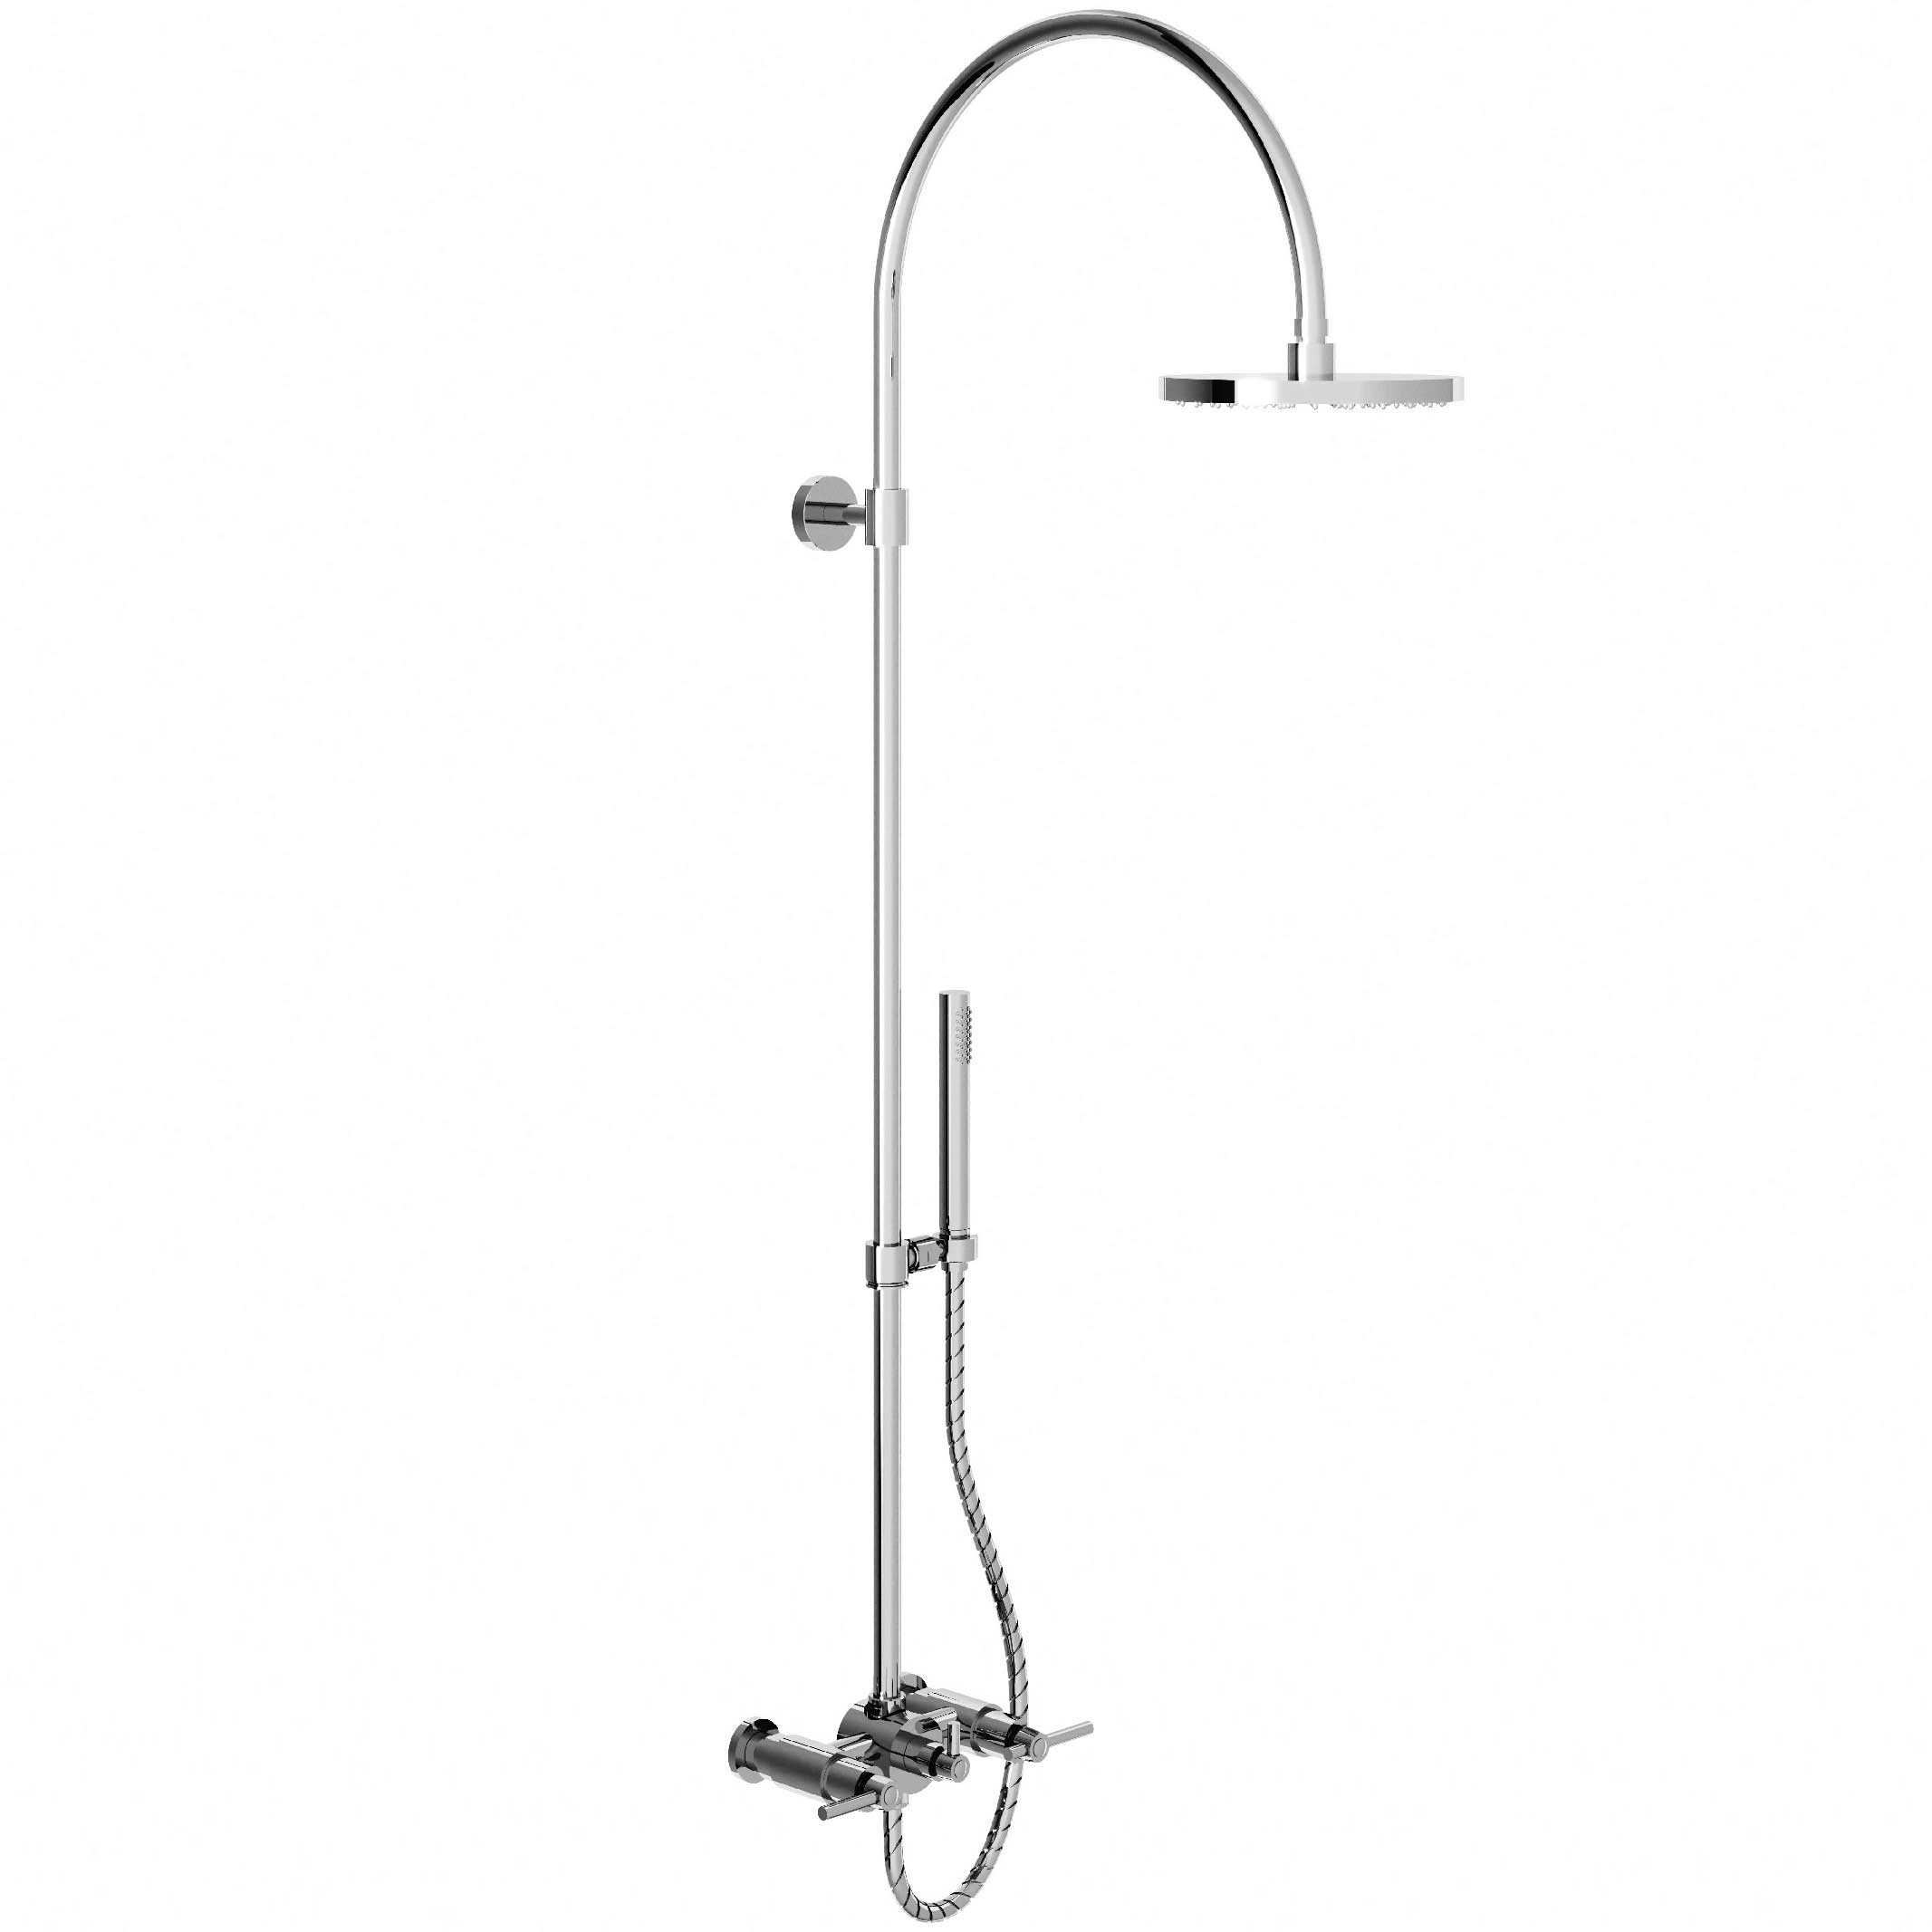 M91-2204 Shower mixer with column, anti-scaling